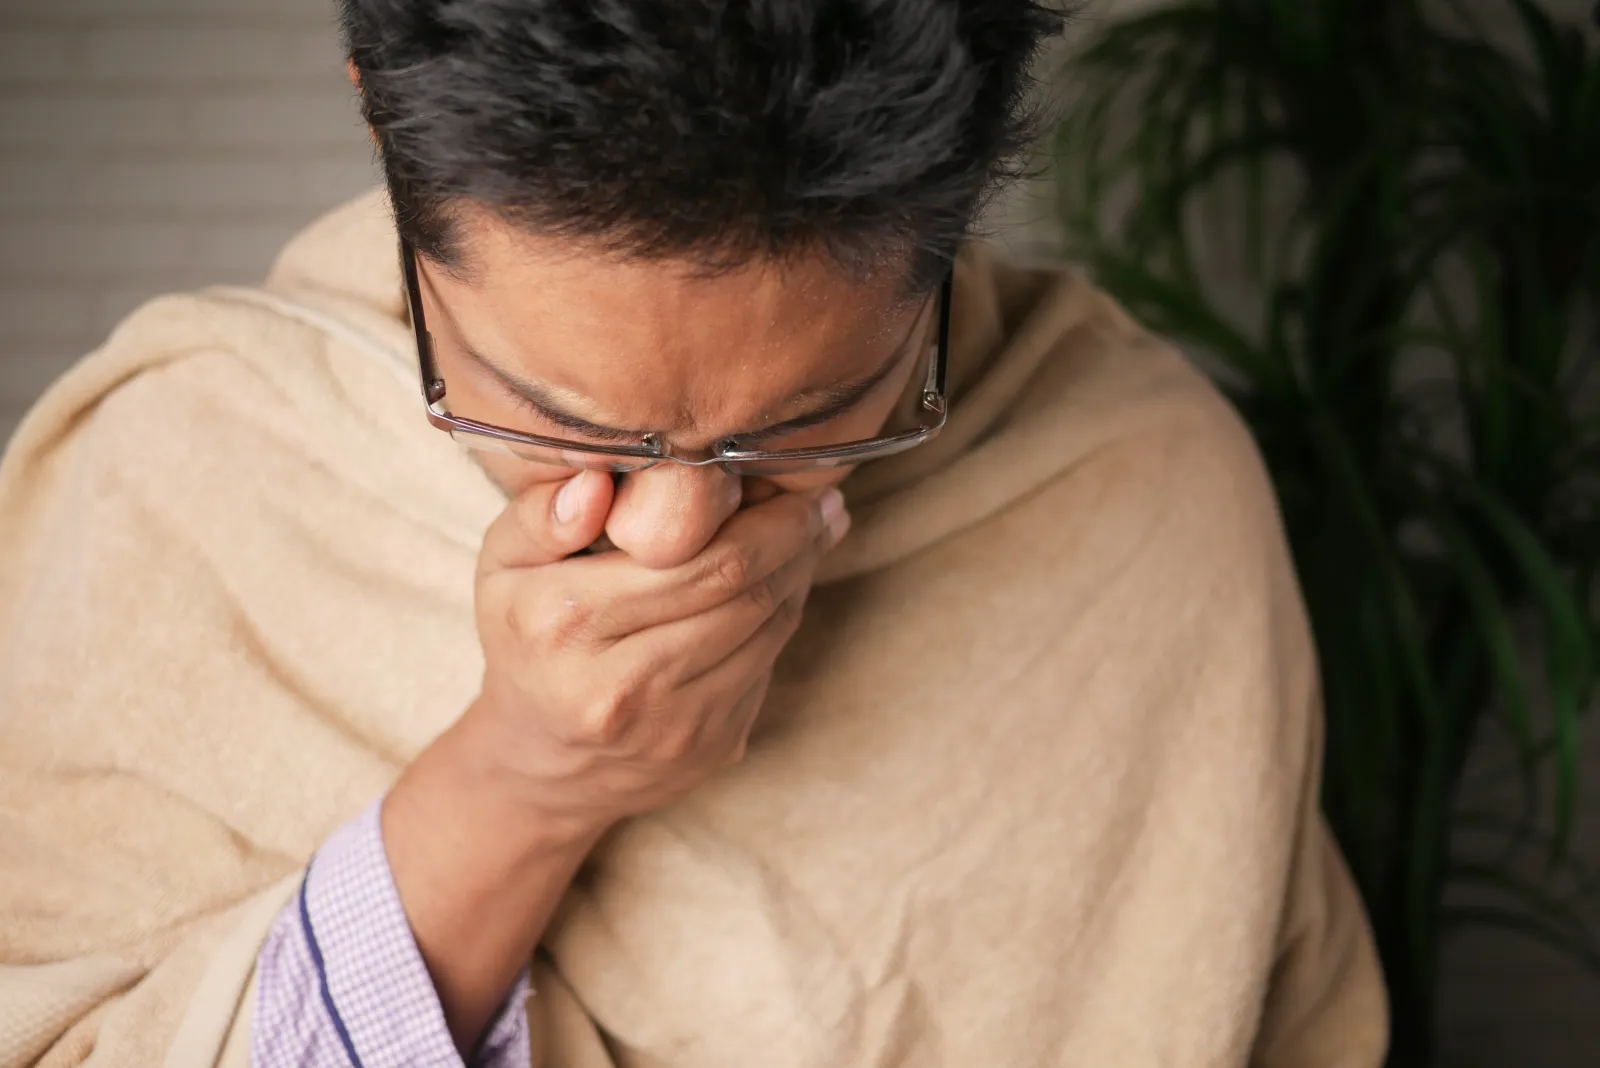 A man wearing glasses, covering his nose with his hand and sneezing into his hand as he suffers from dirty air ducts causing allergies